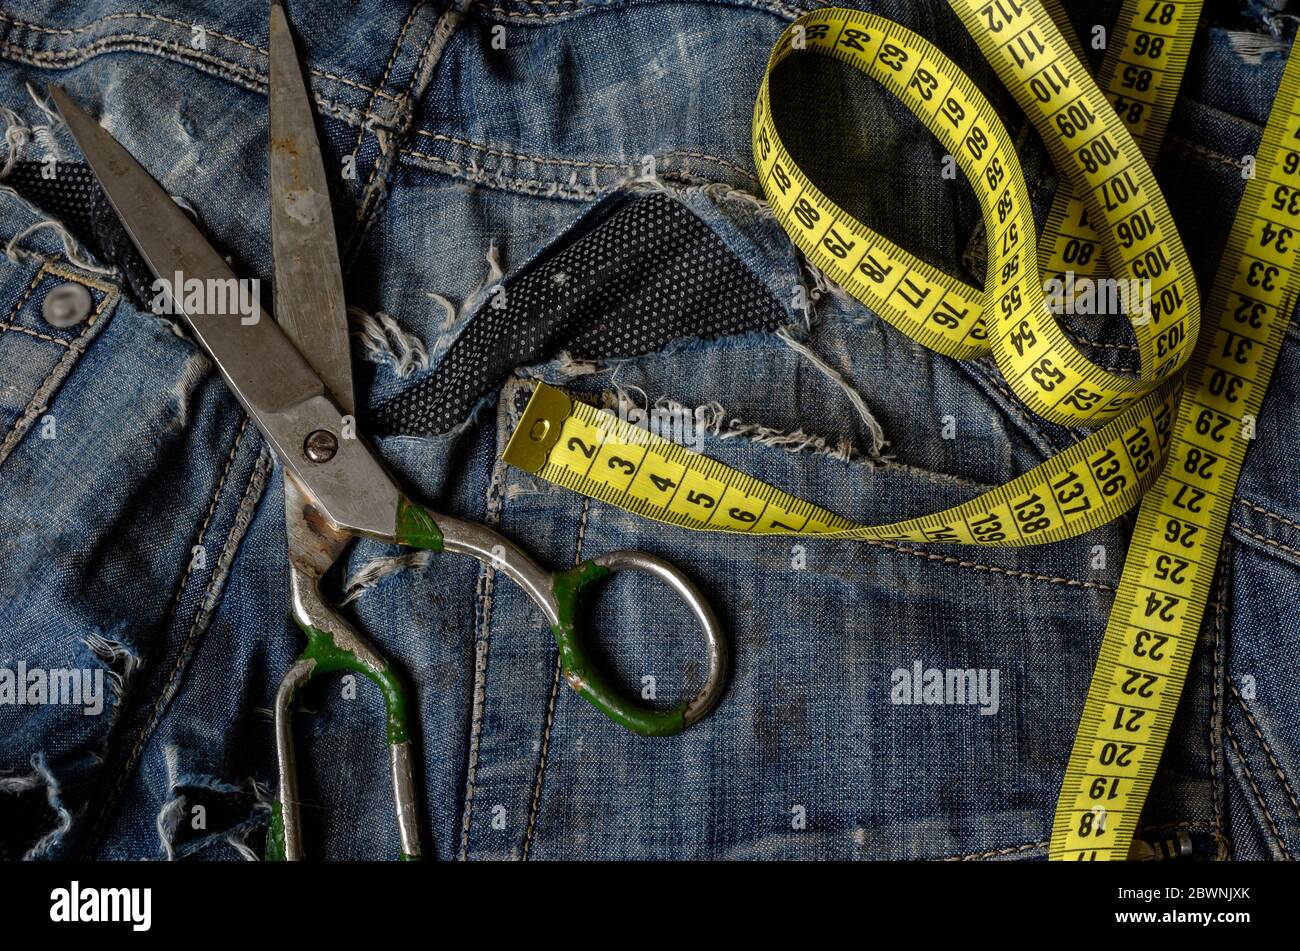 https://c8.alamy.com/comp/2BWNJXK/tailoring-and-design-concept-metal-scissors-ruler-and-yellow-measure-tape-in-denim-pants-pockets-small-business-clothing-repair-services-2BWNJXK.jpg